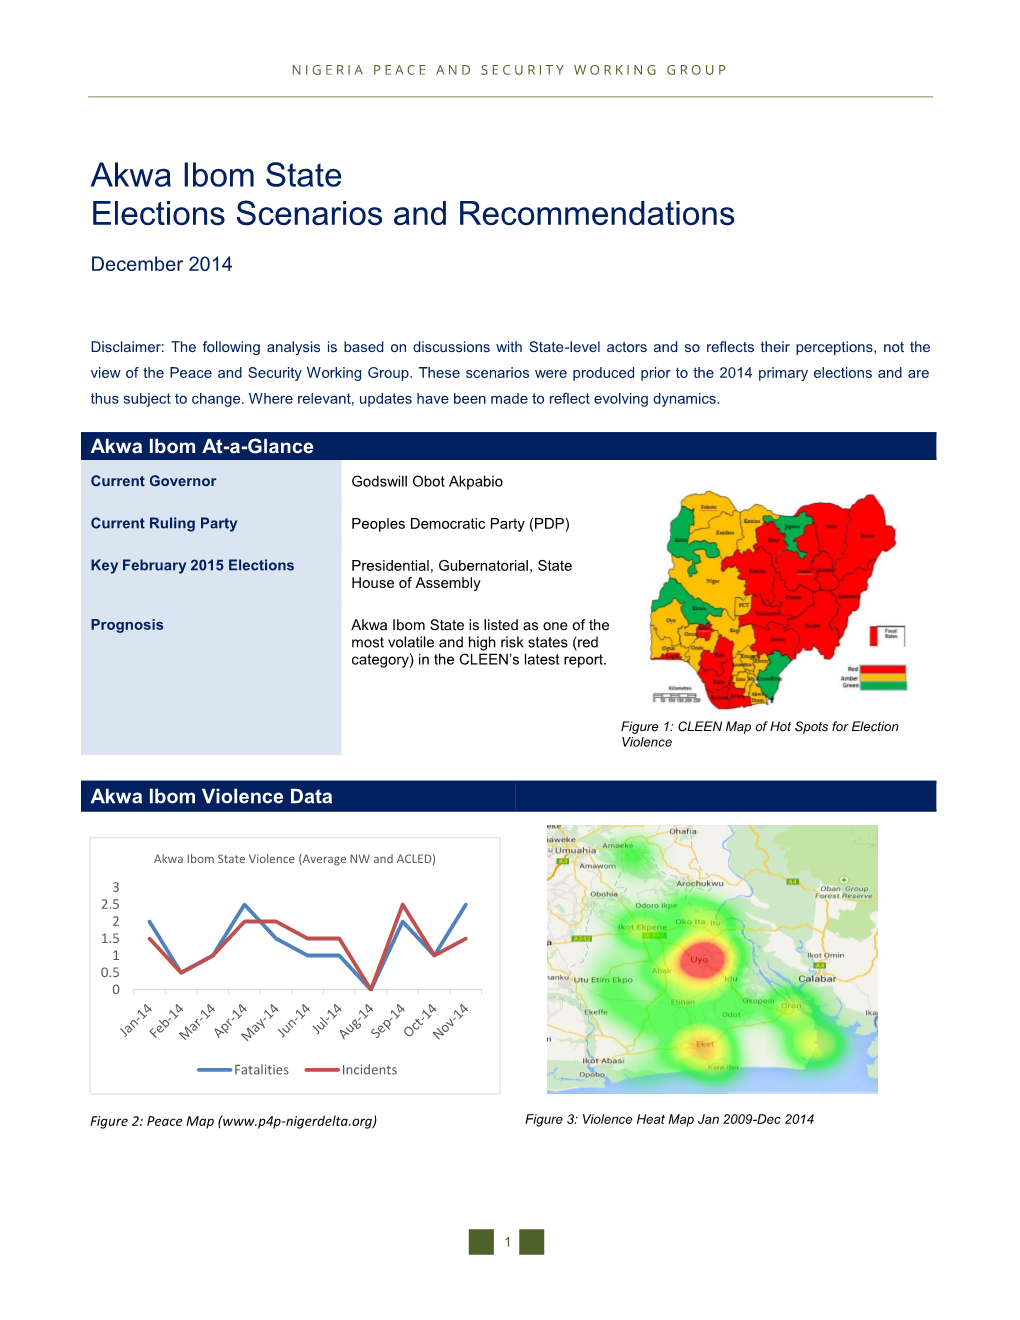 Akwa Ibom State Elections Scenarios and Recommendations